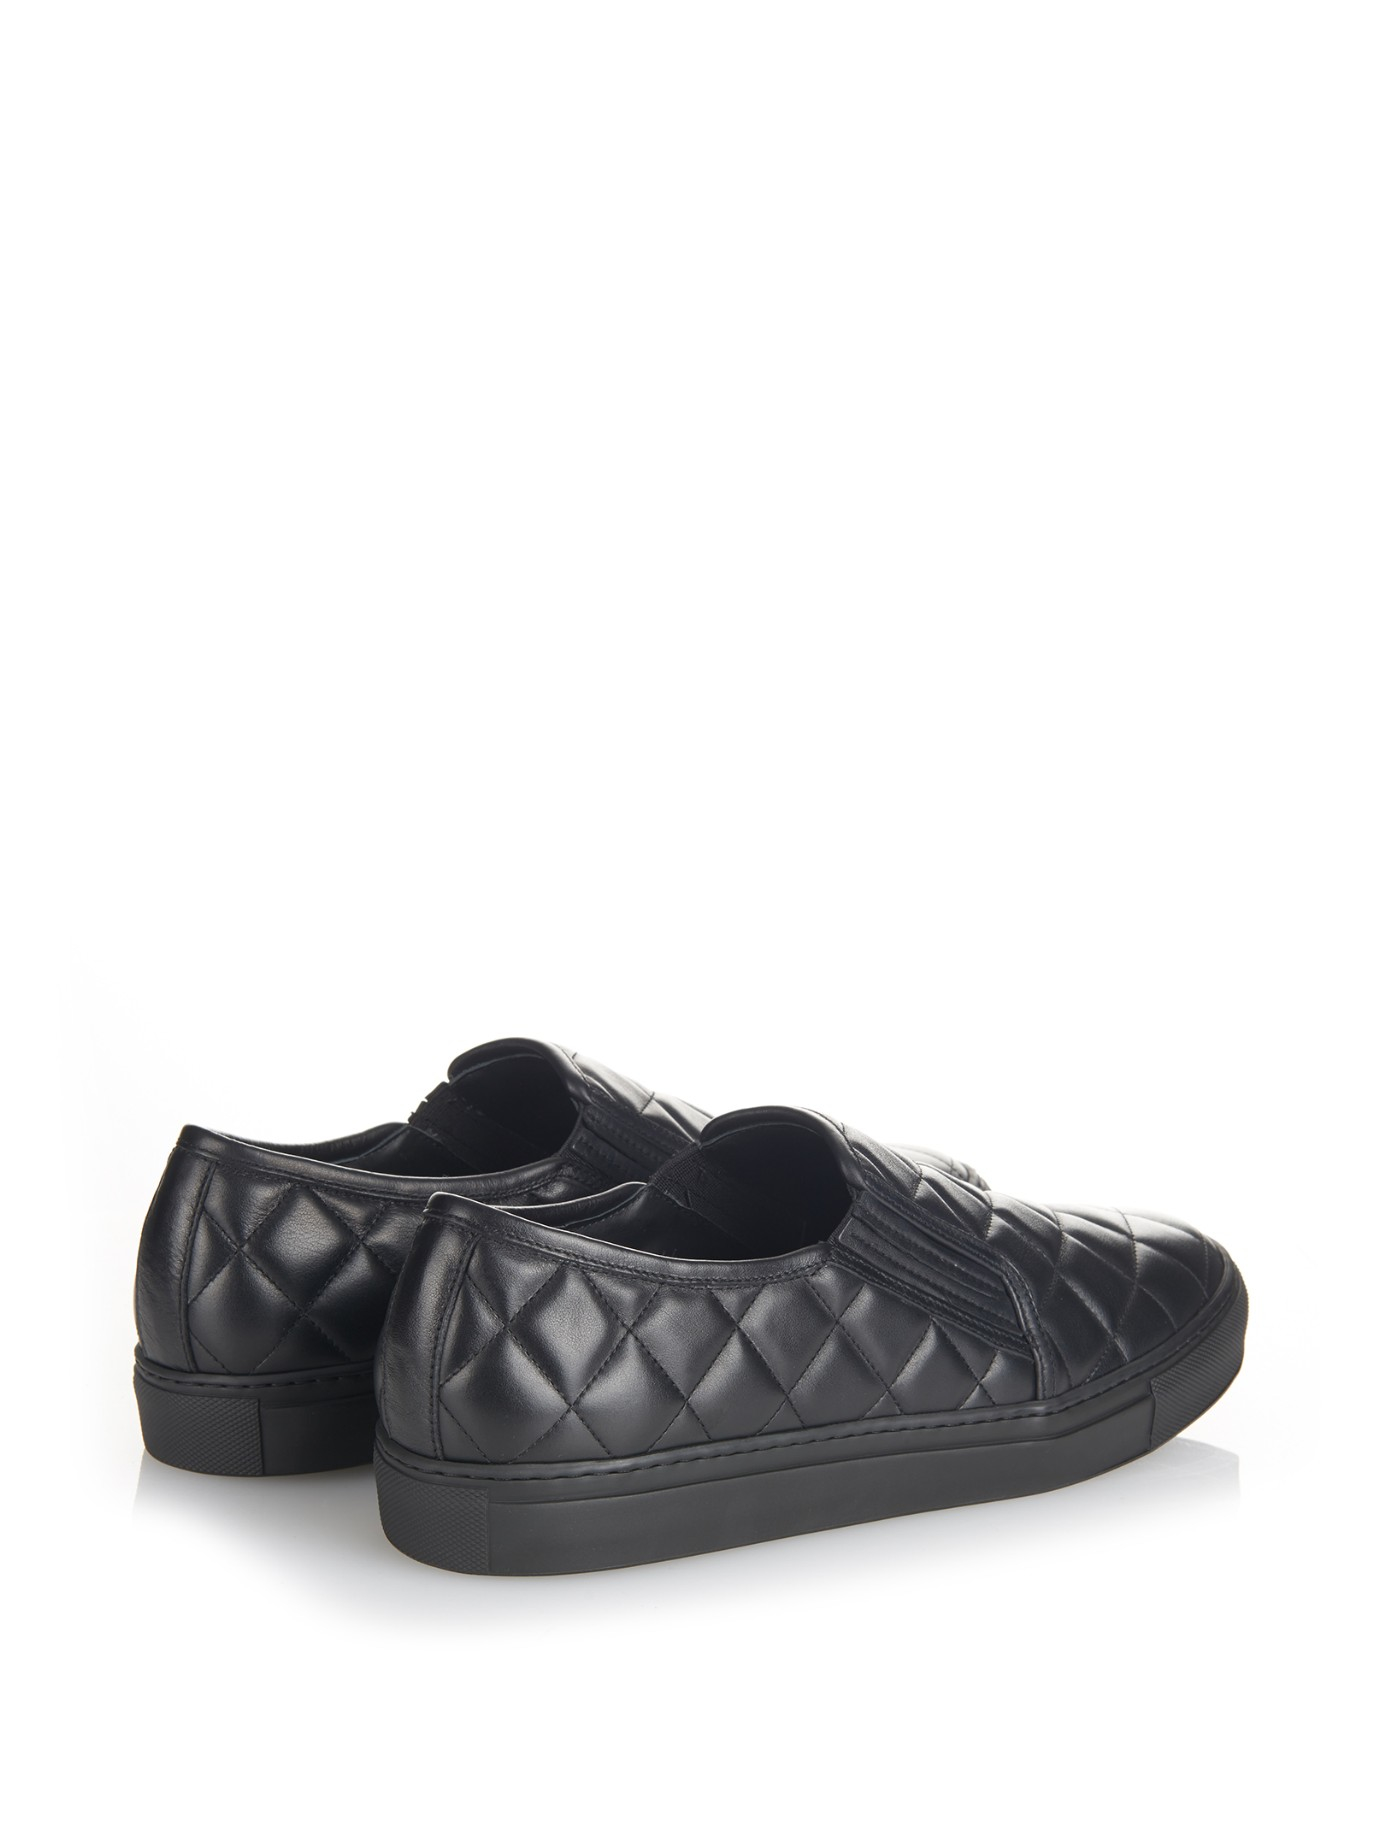 Balmain Quilted Leather Skate Shoes in Black for Men Lyst